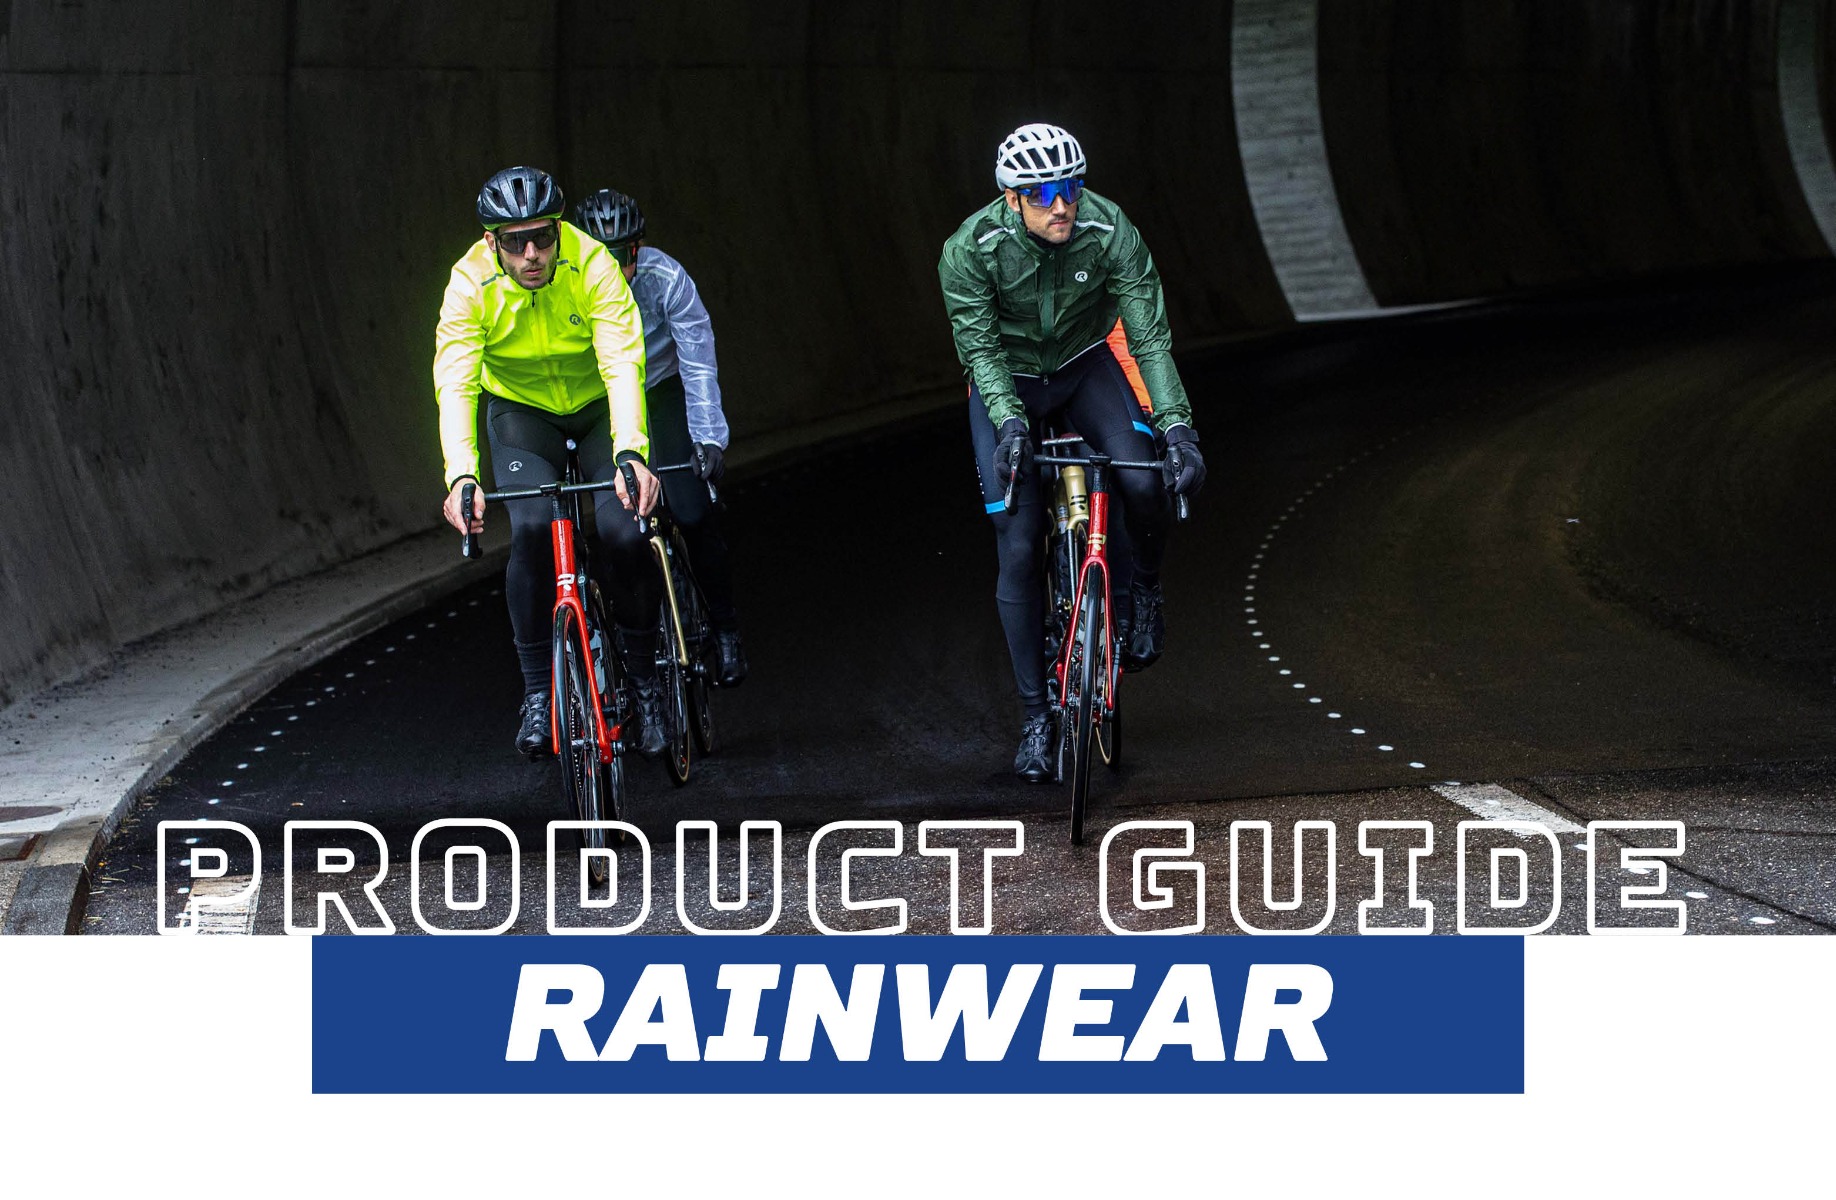 Cyclists, both men and women, ride comfortably in the rain with Rogelli rain jackets and stay dry